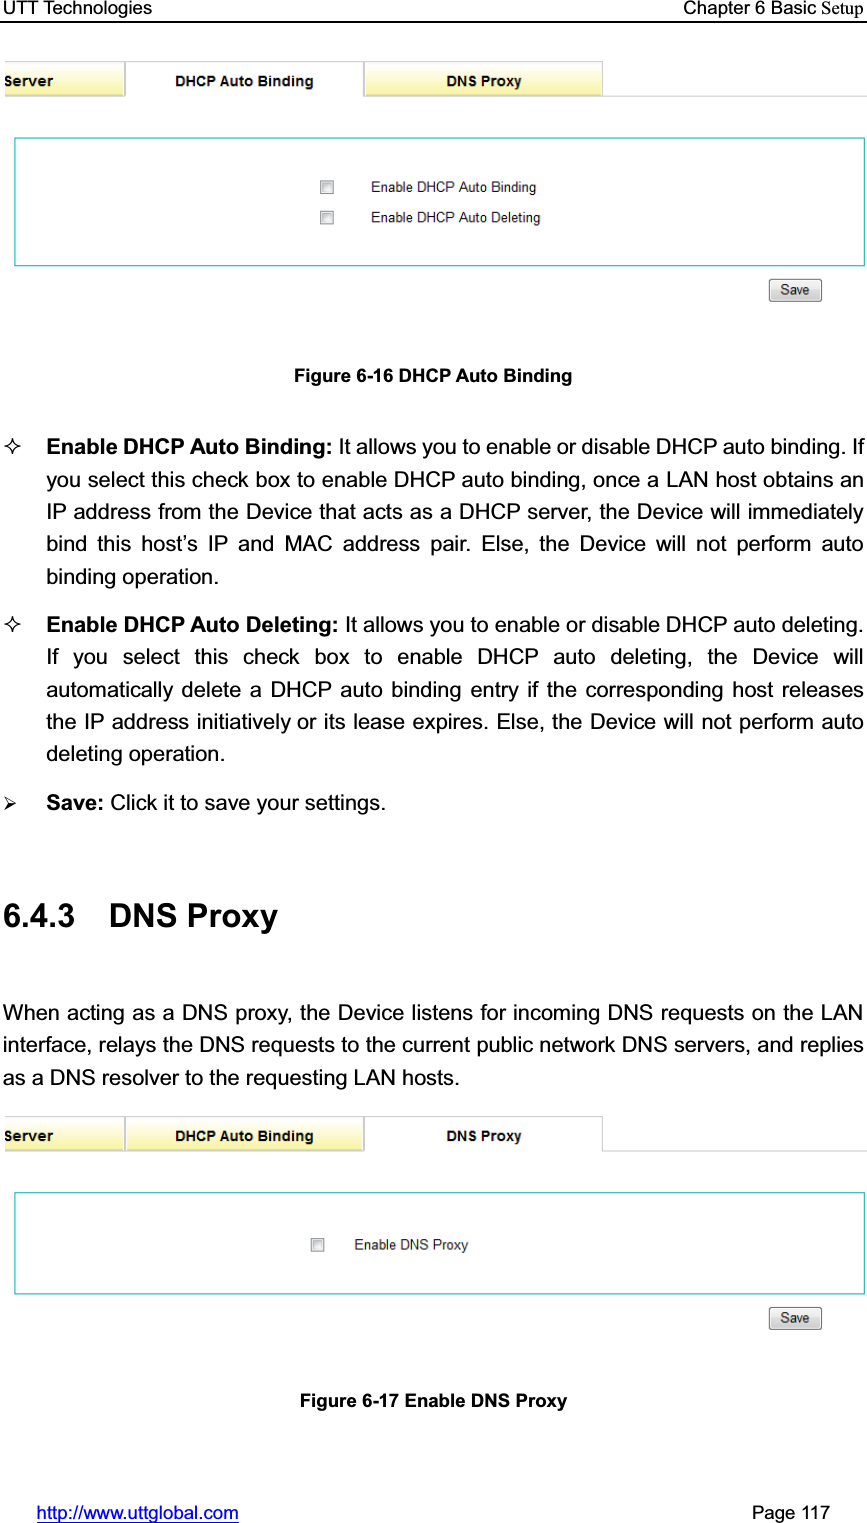 UTT Technologies    Chapter 6 Basic Setuphttp://www.uttglobal.com                                                       Page 117 Figure 6-16 DHCP Auto Binding Enable DHCP Auto Binding: It allows you to enable or disable DHCP auto binding. If you select this check box to enable DHCP auto binding, once a LAN host obtains an IP address from the Device that acts as a DHCP server, the Device will immediately bind this host¶s IP and MAC address pair. Else, the Device will not perform auto binding operation.Enable DHCP Auto Deleting: It allows you to enable or disable DHCP auto deleting. If you select this check box to enable DHCP auto deleting, the Device will automatically delete a DHCP auto binding entry if the corresponding host releases the IP address initiatively or its lease expires. Else, the Device will not perform auto deleting operation. ¾Save: Click it to save your settings.6.4.3 DNS Proxy When acting as a DNS proxy, the Device listens for incoming DNS requests on the LAN interface, relays the DNS requests to the current public network DNS servers, and replies as a DNS resolver to the requesting LAN hosts.   Figure 6-17 Enable DNS Proxy 